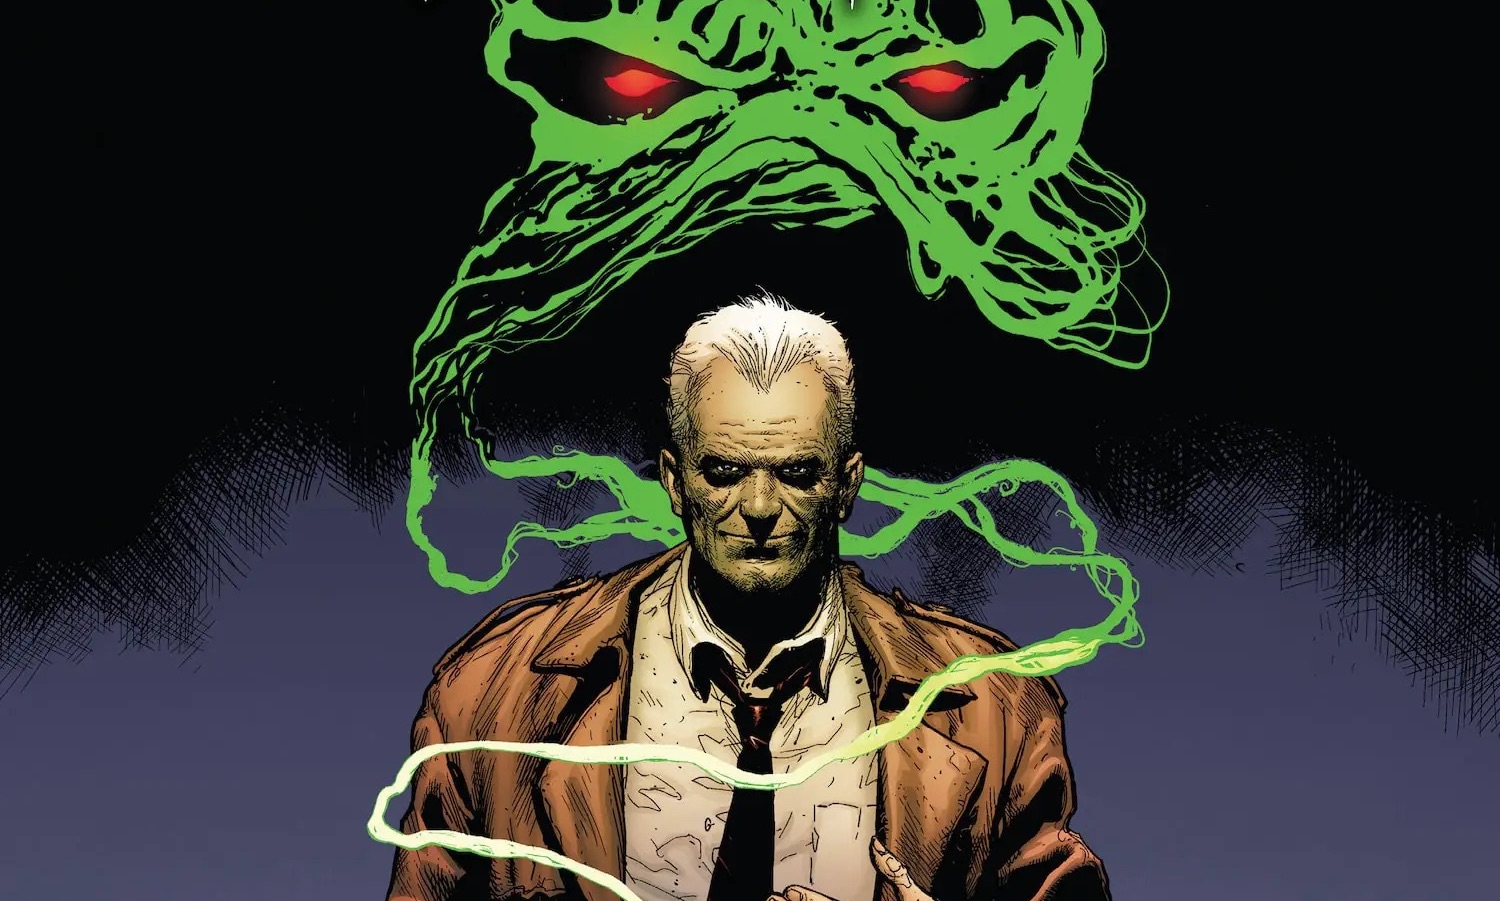 Swamp Thing: Green Hell #2